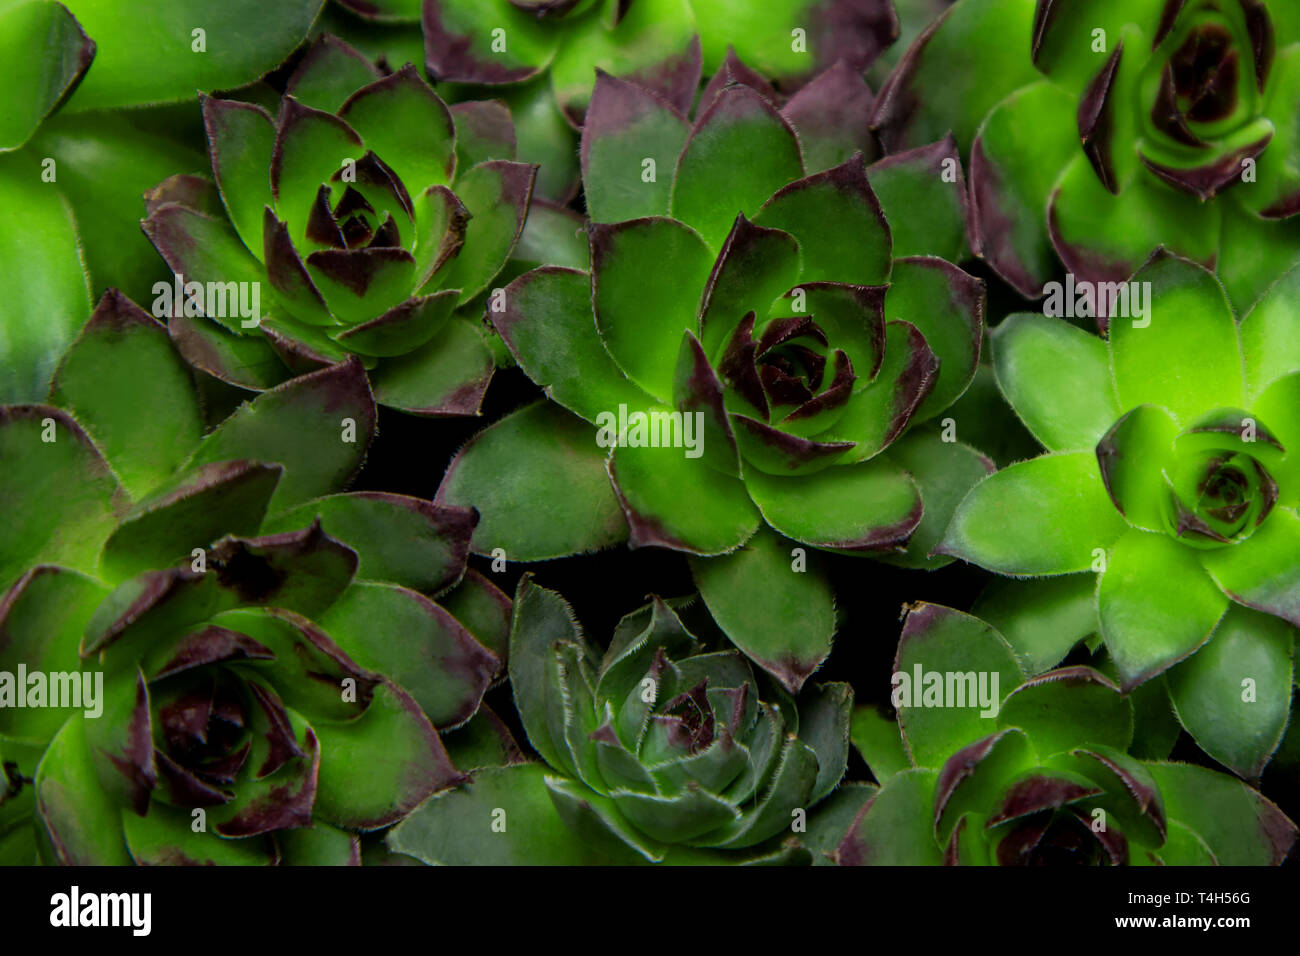 Group of different Aeoniums on the black background. Small flowers on ground of green, pink and yellow colors. Stock Photo